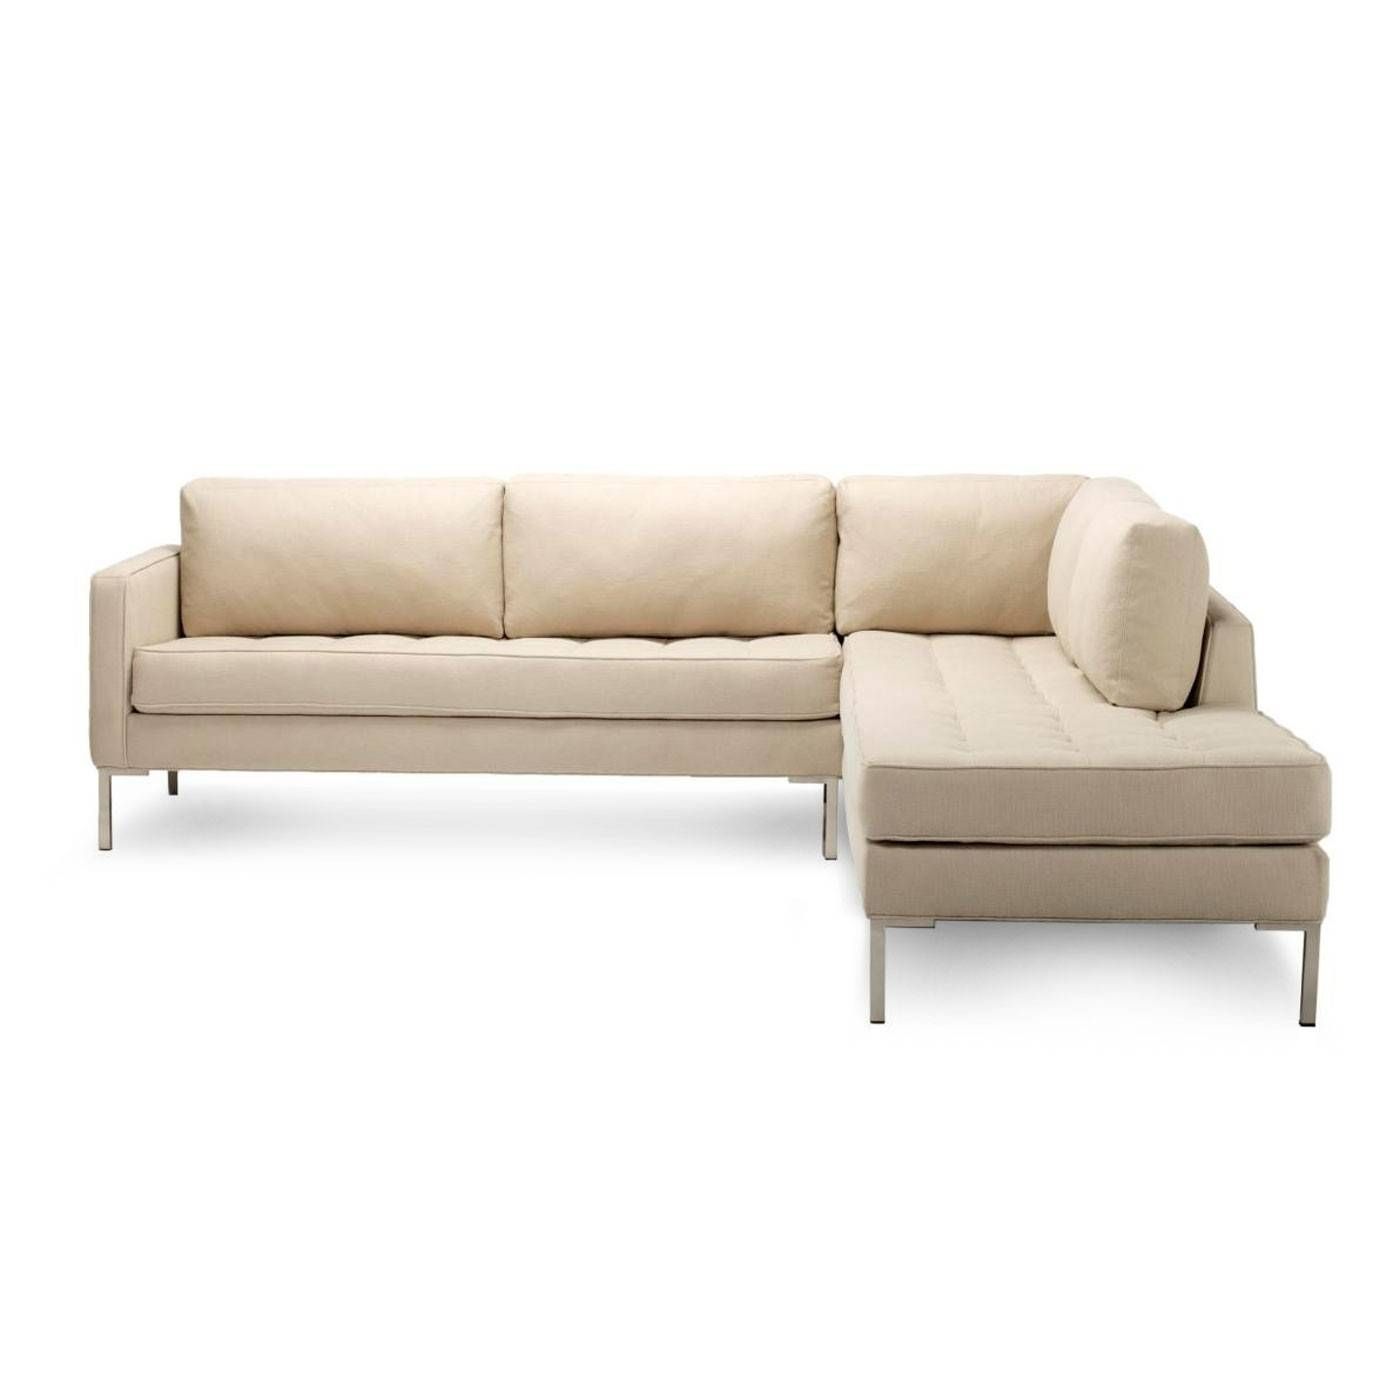 Small Modern Sectional Sofa | Homefurniture With Small Modern Sofas (Photo 11 of 15)